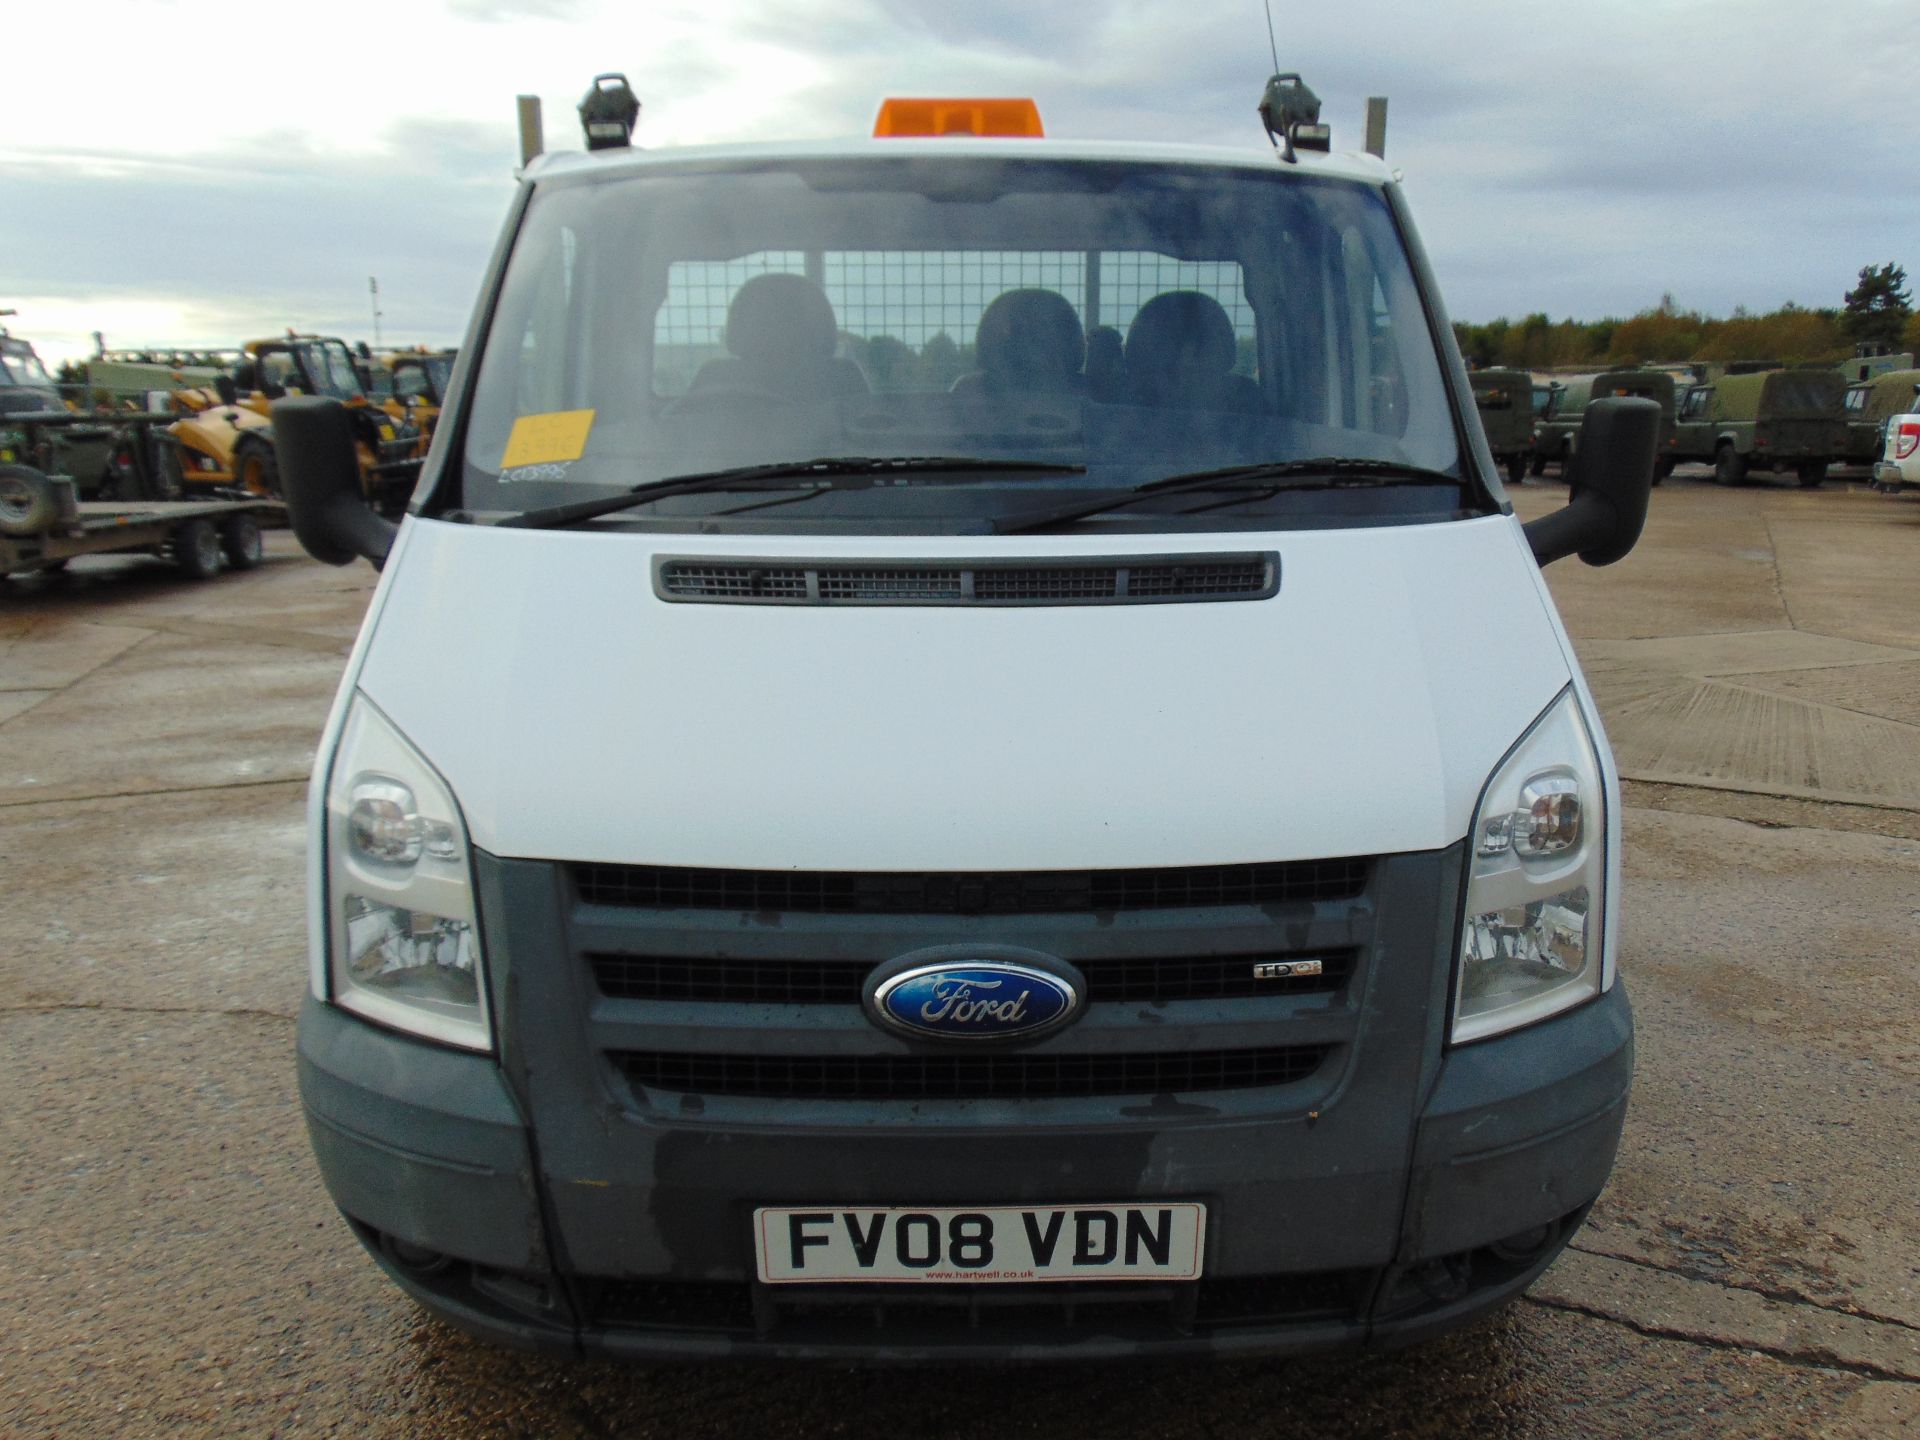 Ford Transit 115 T350 Flat Bed Tipper - Image 3 of 17